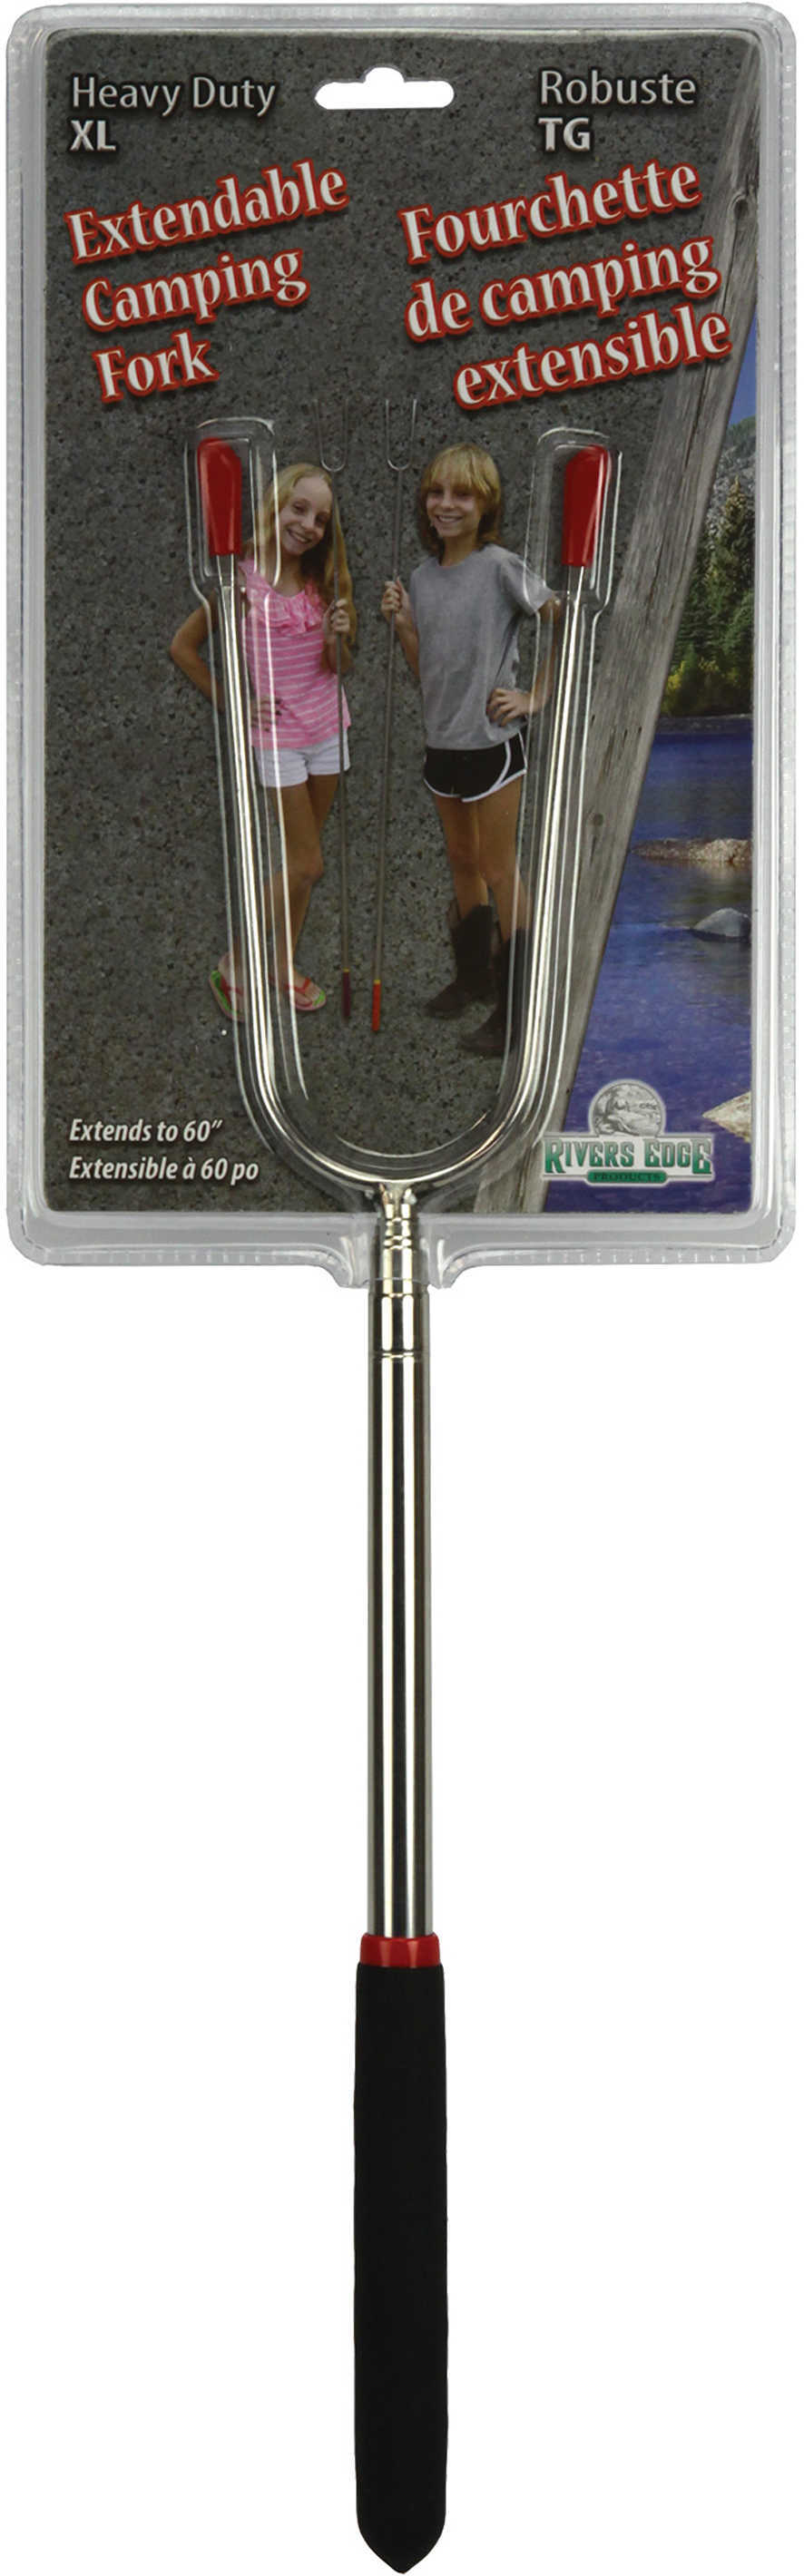 Rivers Edge Products Extendable Camping Fork Heavy Duty, 16" to 60" Md: 910CP